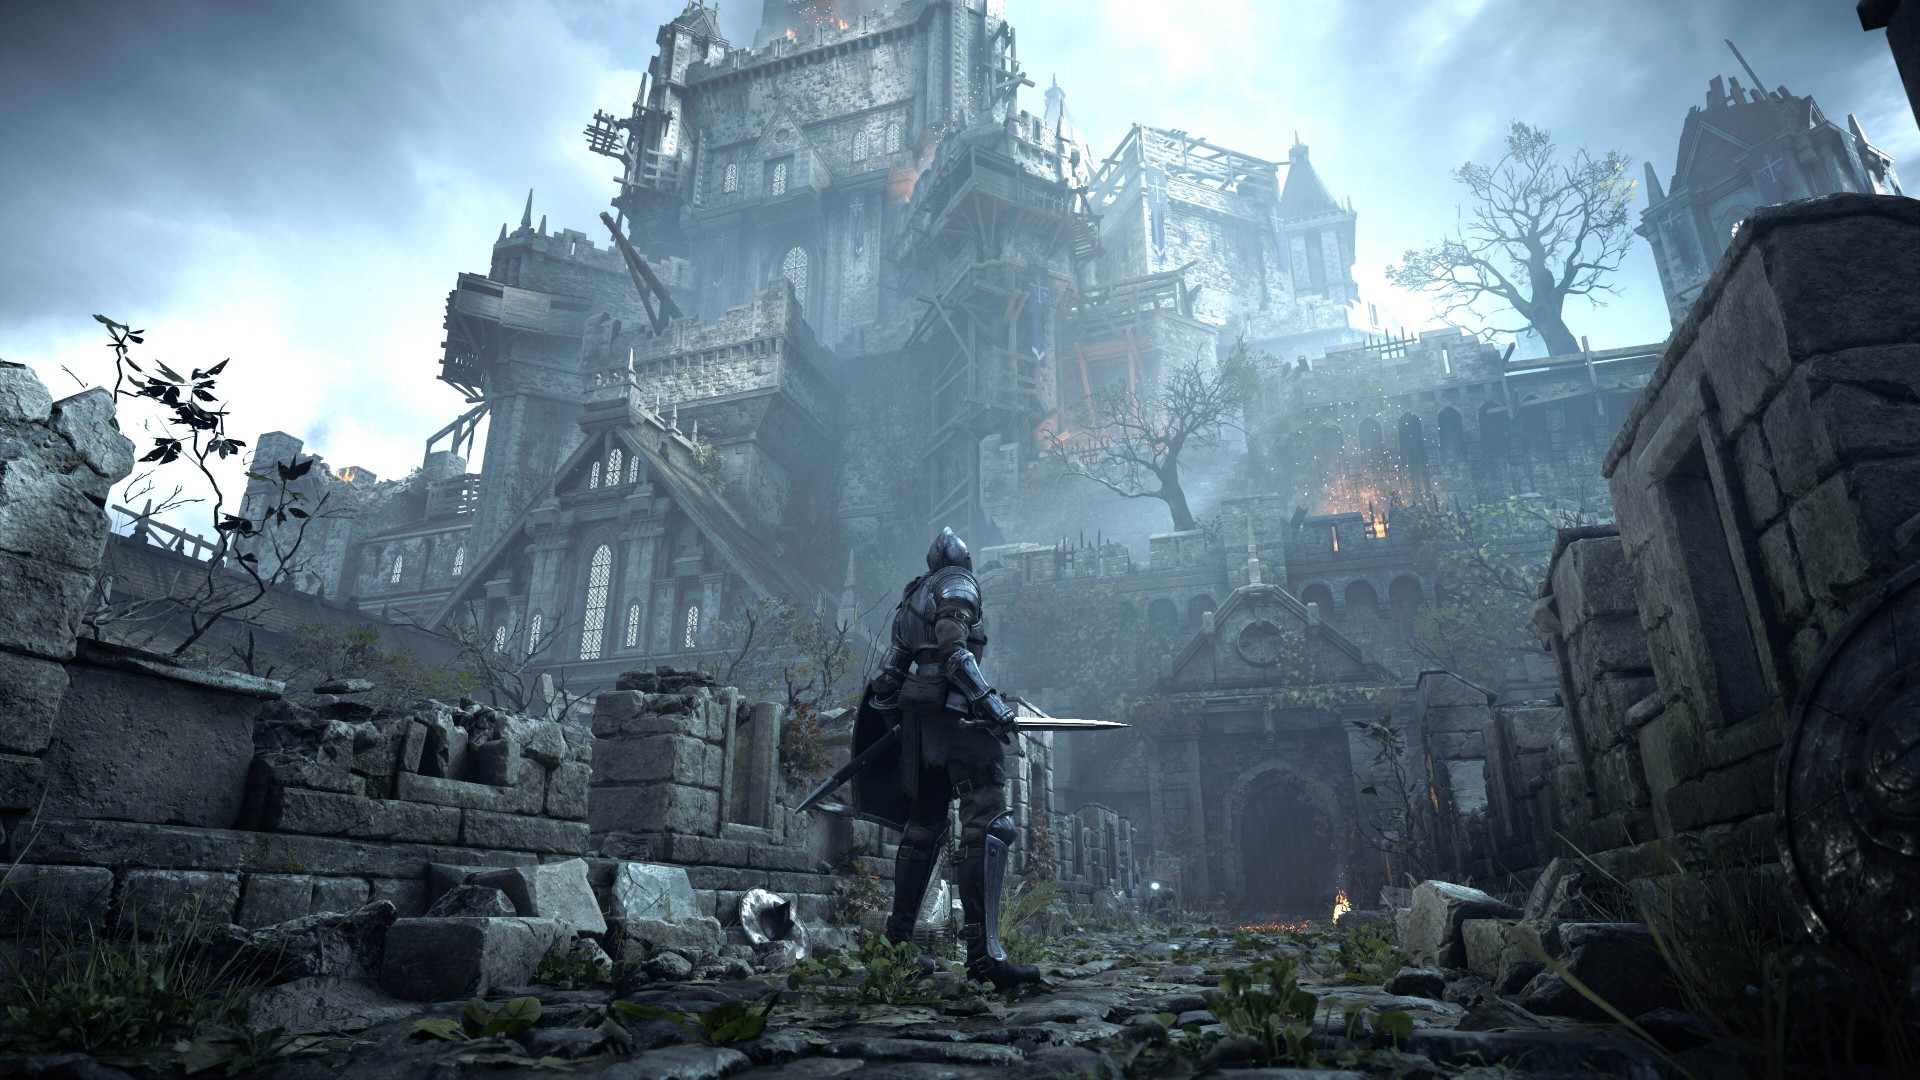 Sony and FromSoftware could work together on film adaptations of